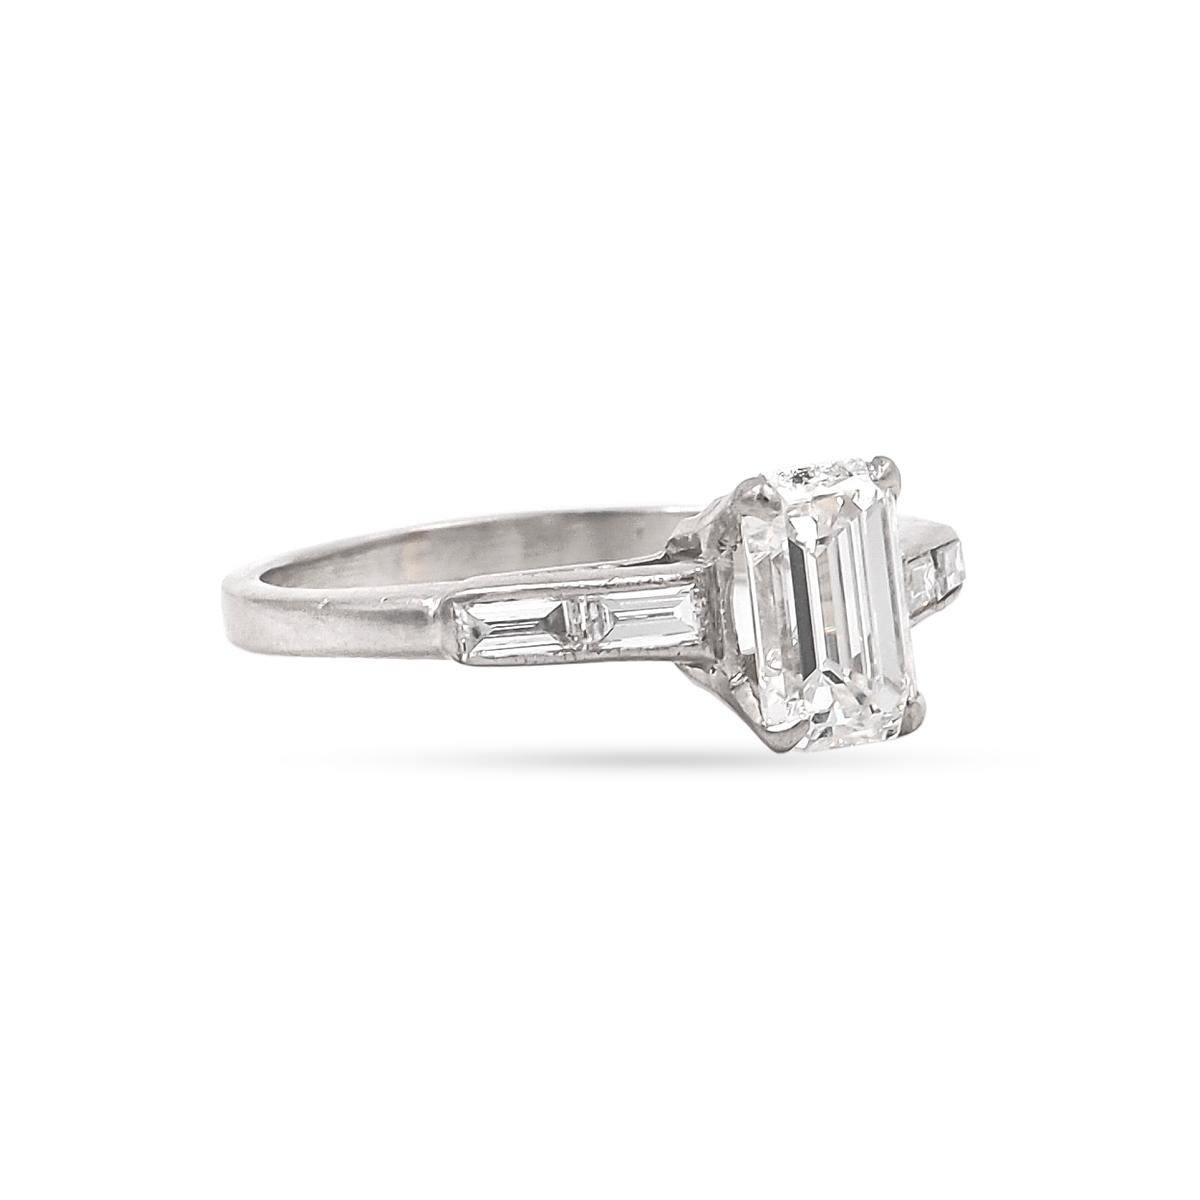 Art Deco era 1.05 Carat Emerald Cut Diamond Engagement Ring composed of platinum. GIA Certified G color/VS1 clarity. Flanked by 4 double-stacked Straight Baguette Cut diamonds on the shoulders, weighing approximately 0.24 carats in total. Circa